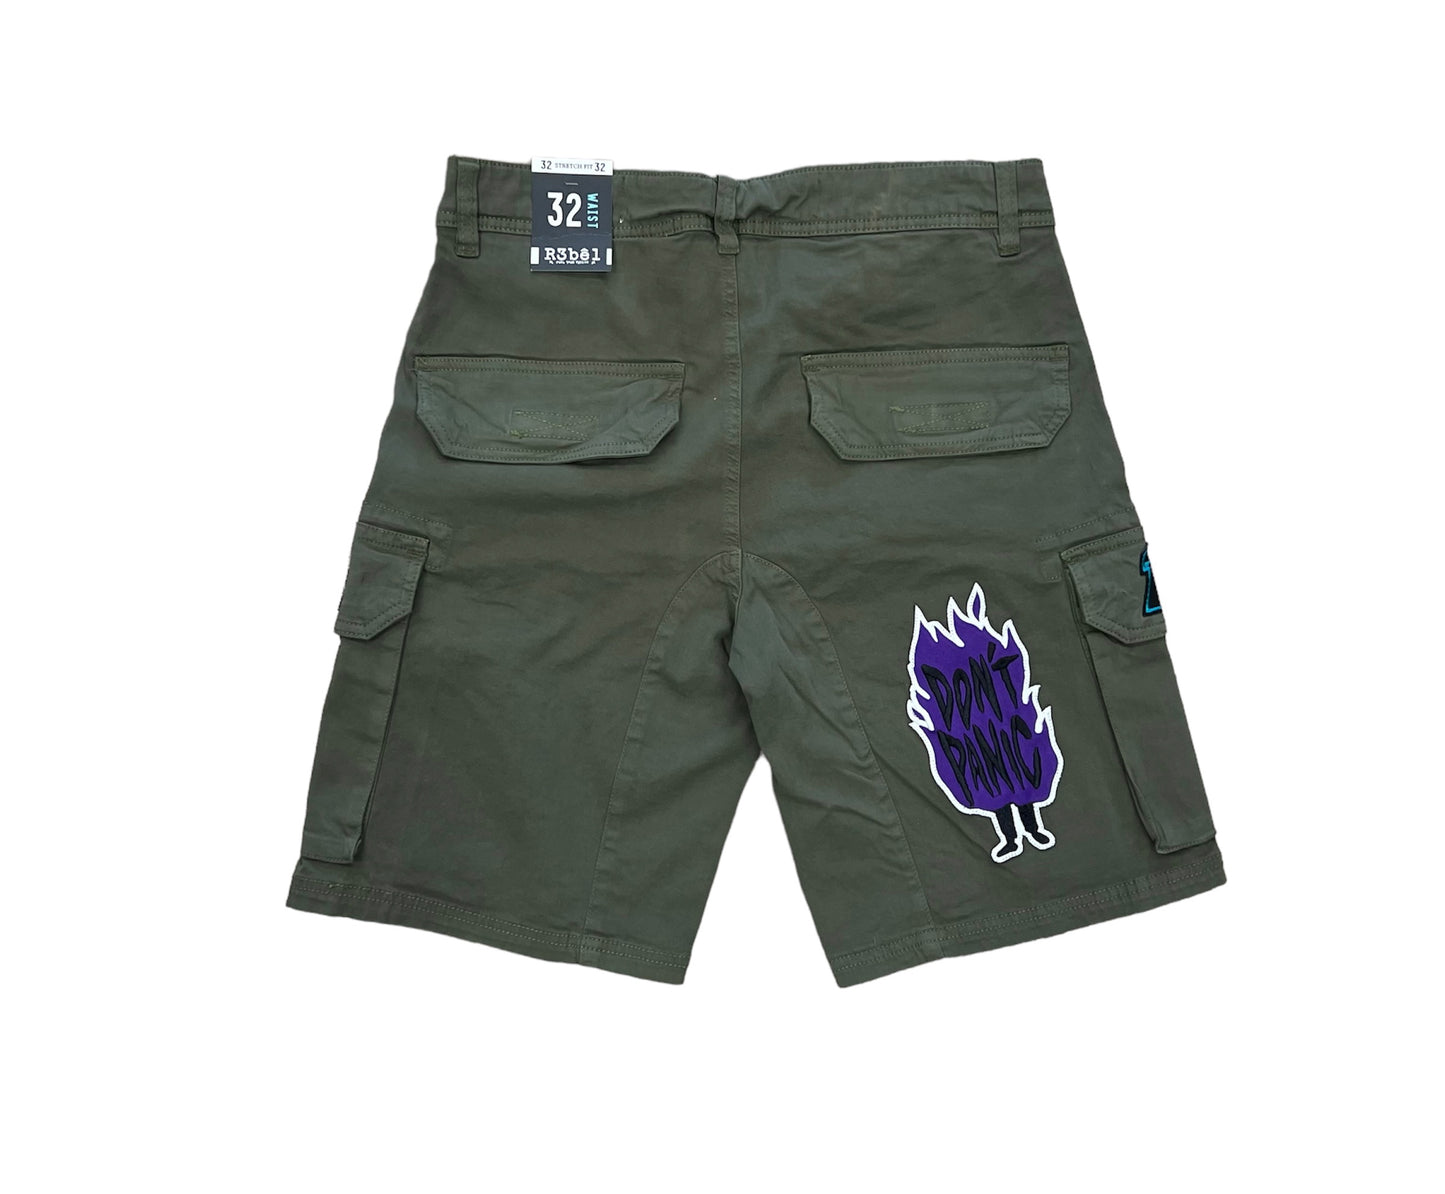 R3BEL PATCH TWILL  OLIVE CARGO SHORTS